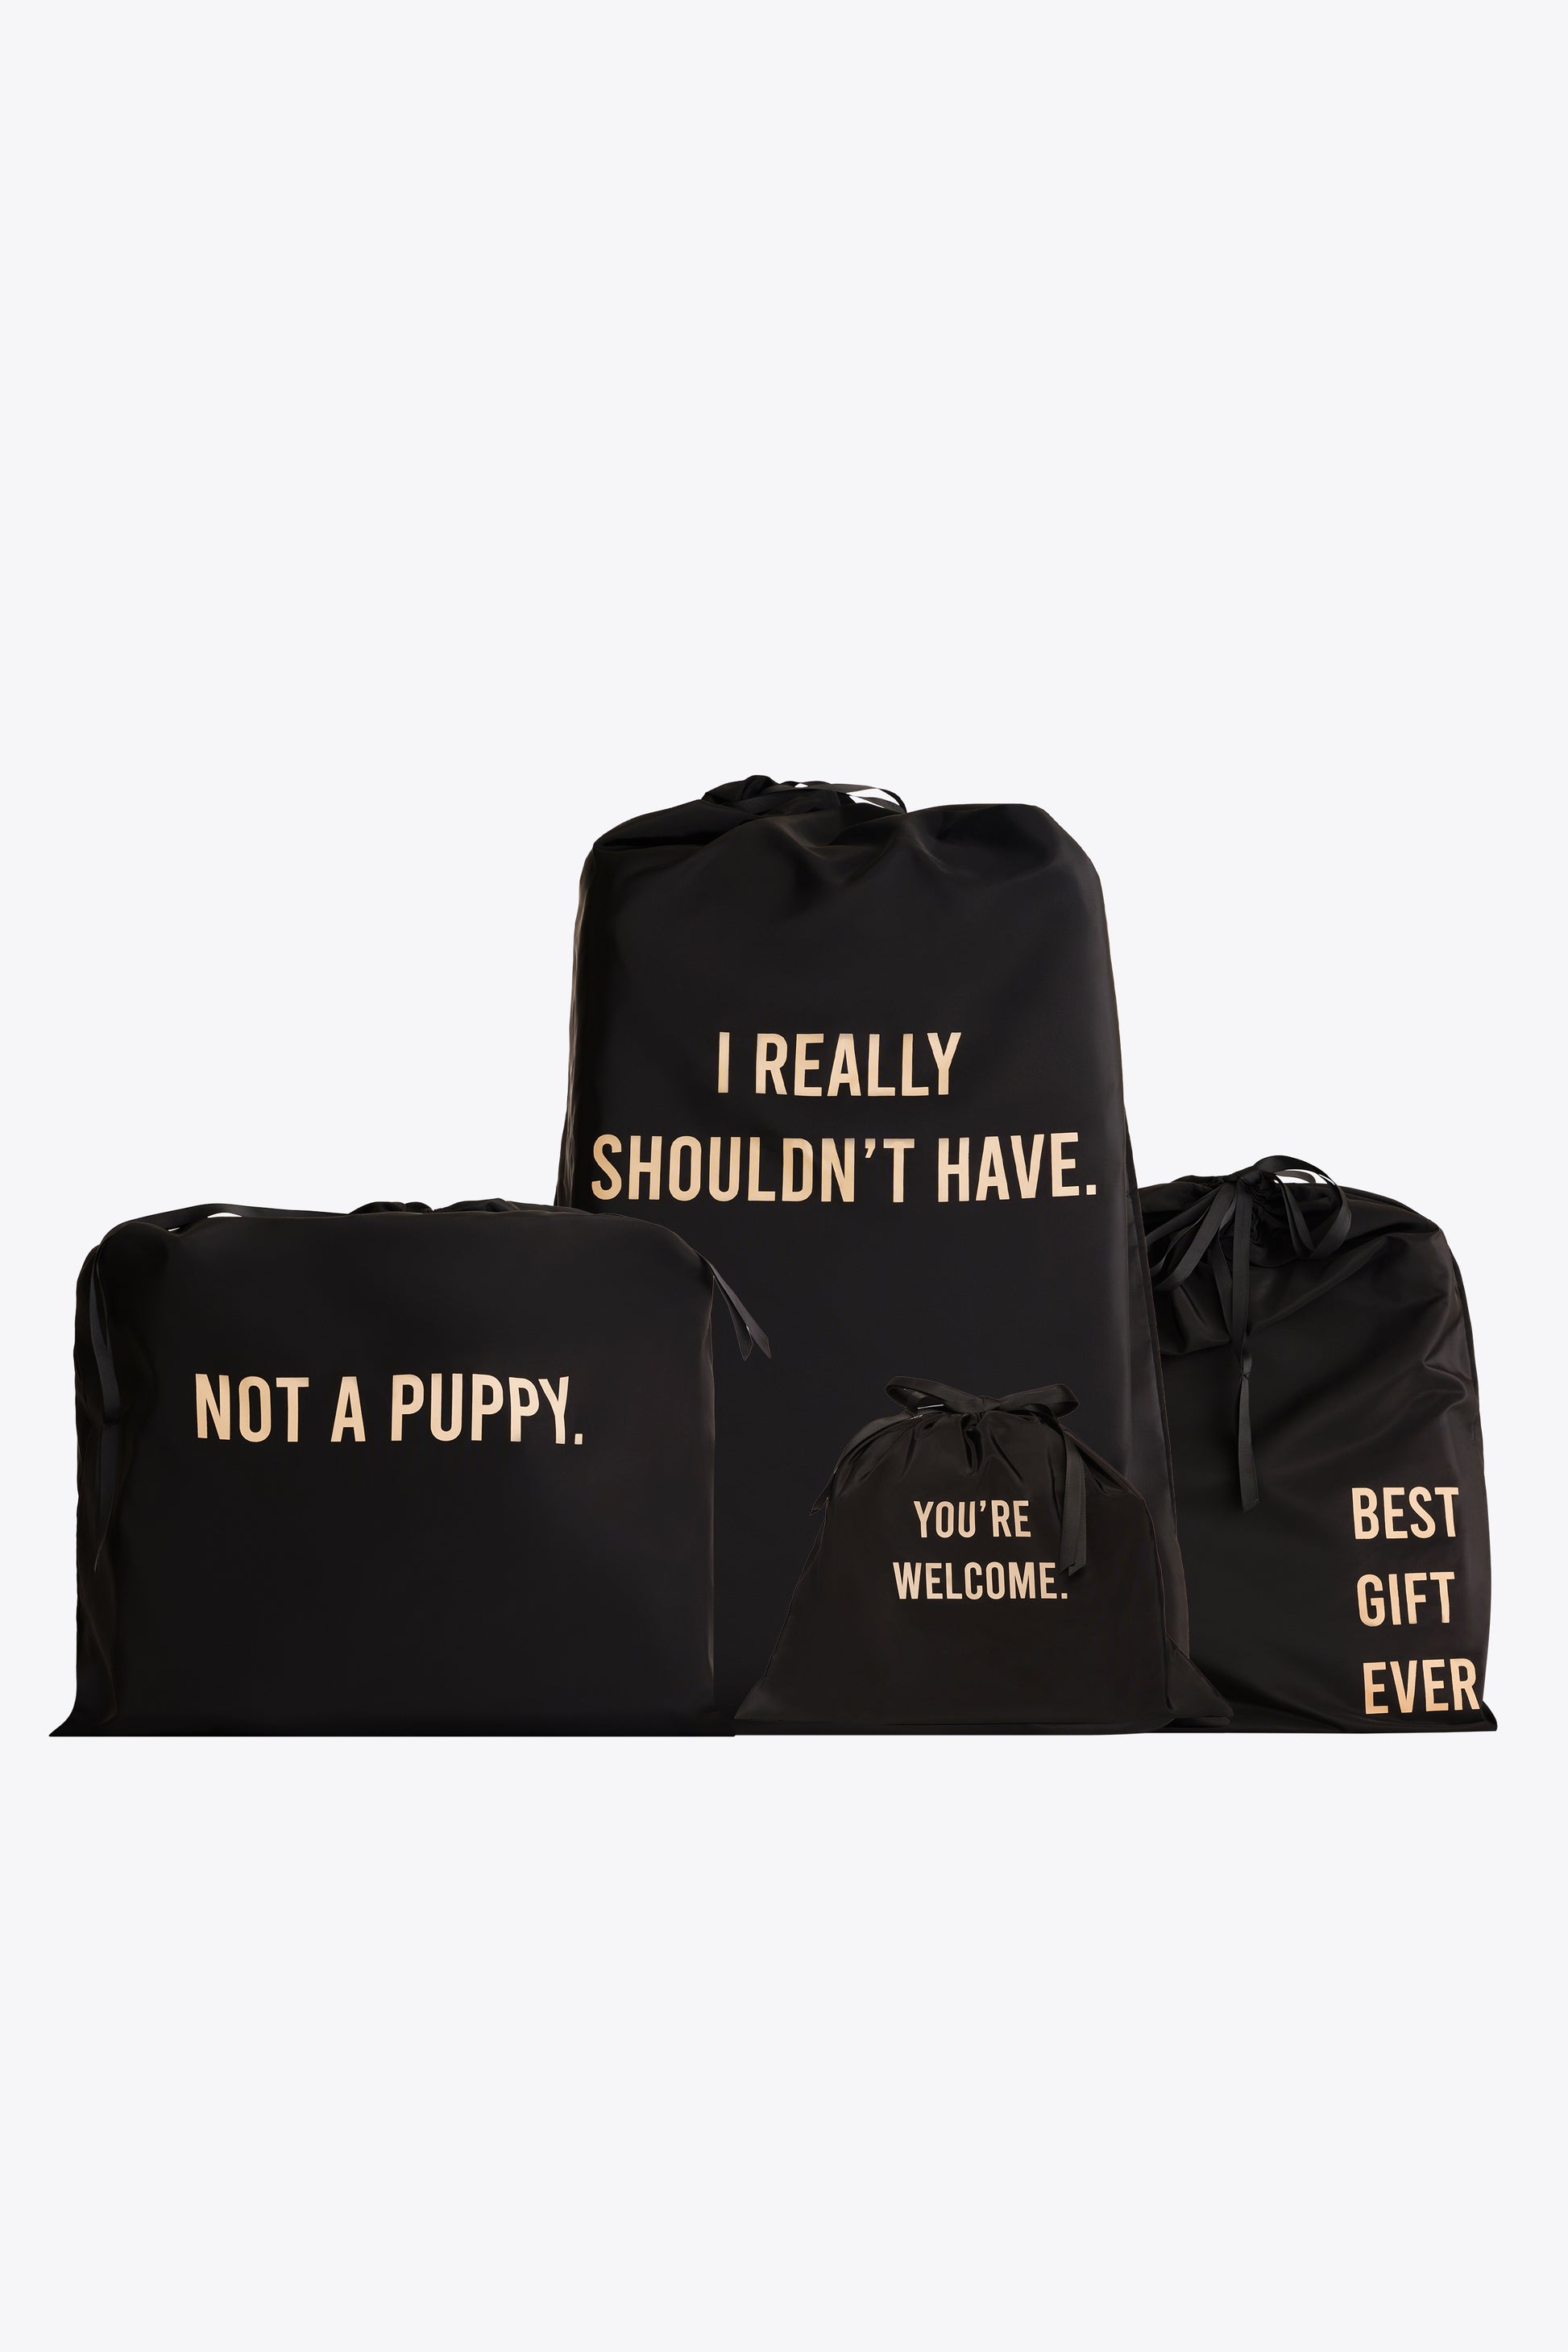 BÉIS 'The Gift Bag' In Black - Gift Wrapping For Béis Bags